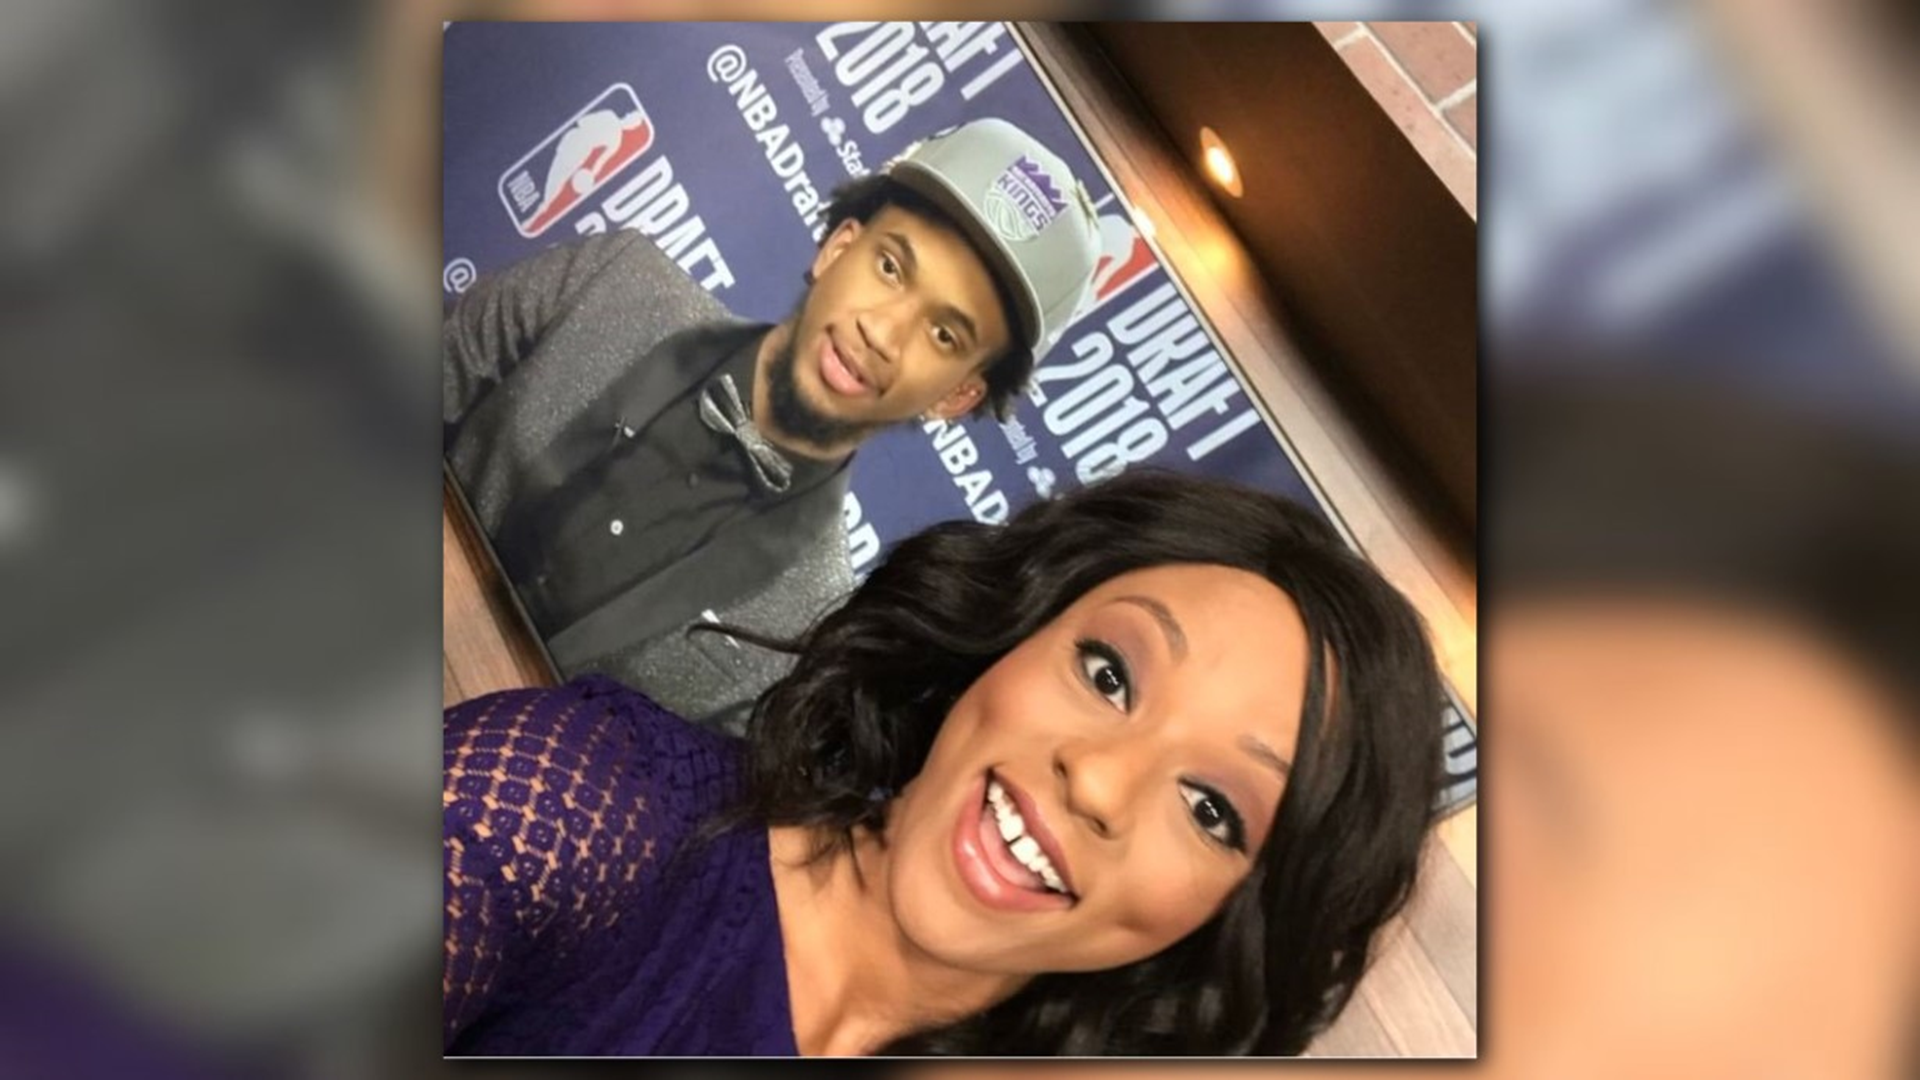 ABC10's Lina Washington speaks with the Kings' second overall NBA Draft pick, Marvin Bagley III, moments after being selected by Sacramento.